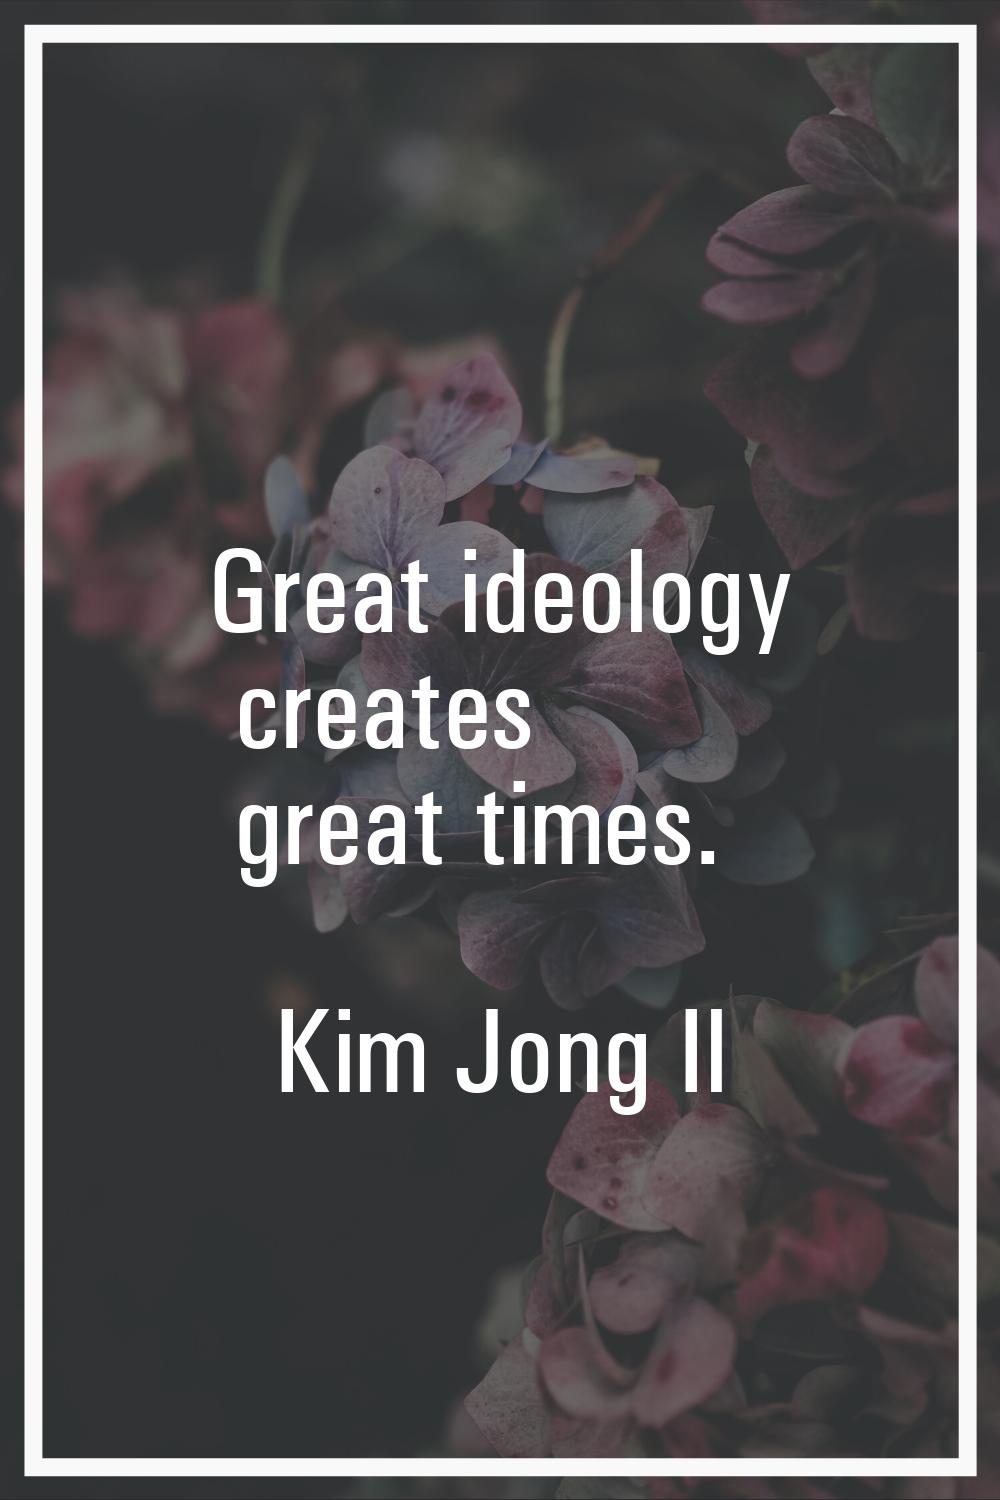 Great ideology creates great times.